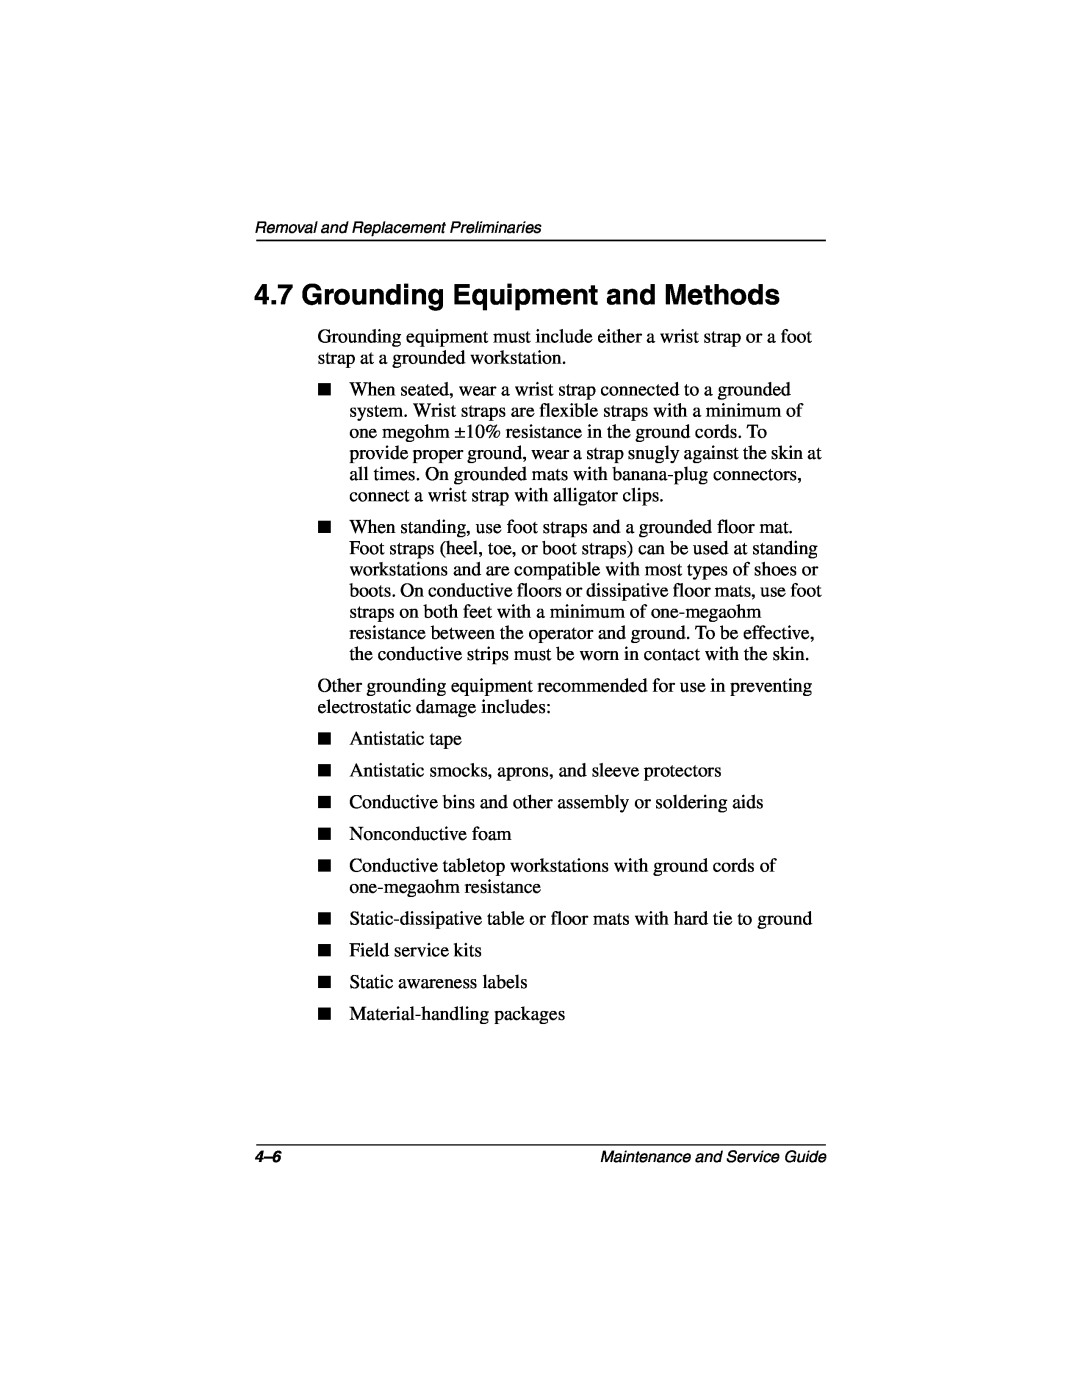 Compaq N160 manual Grounding Equipment and Methods 